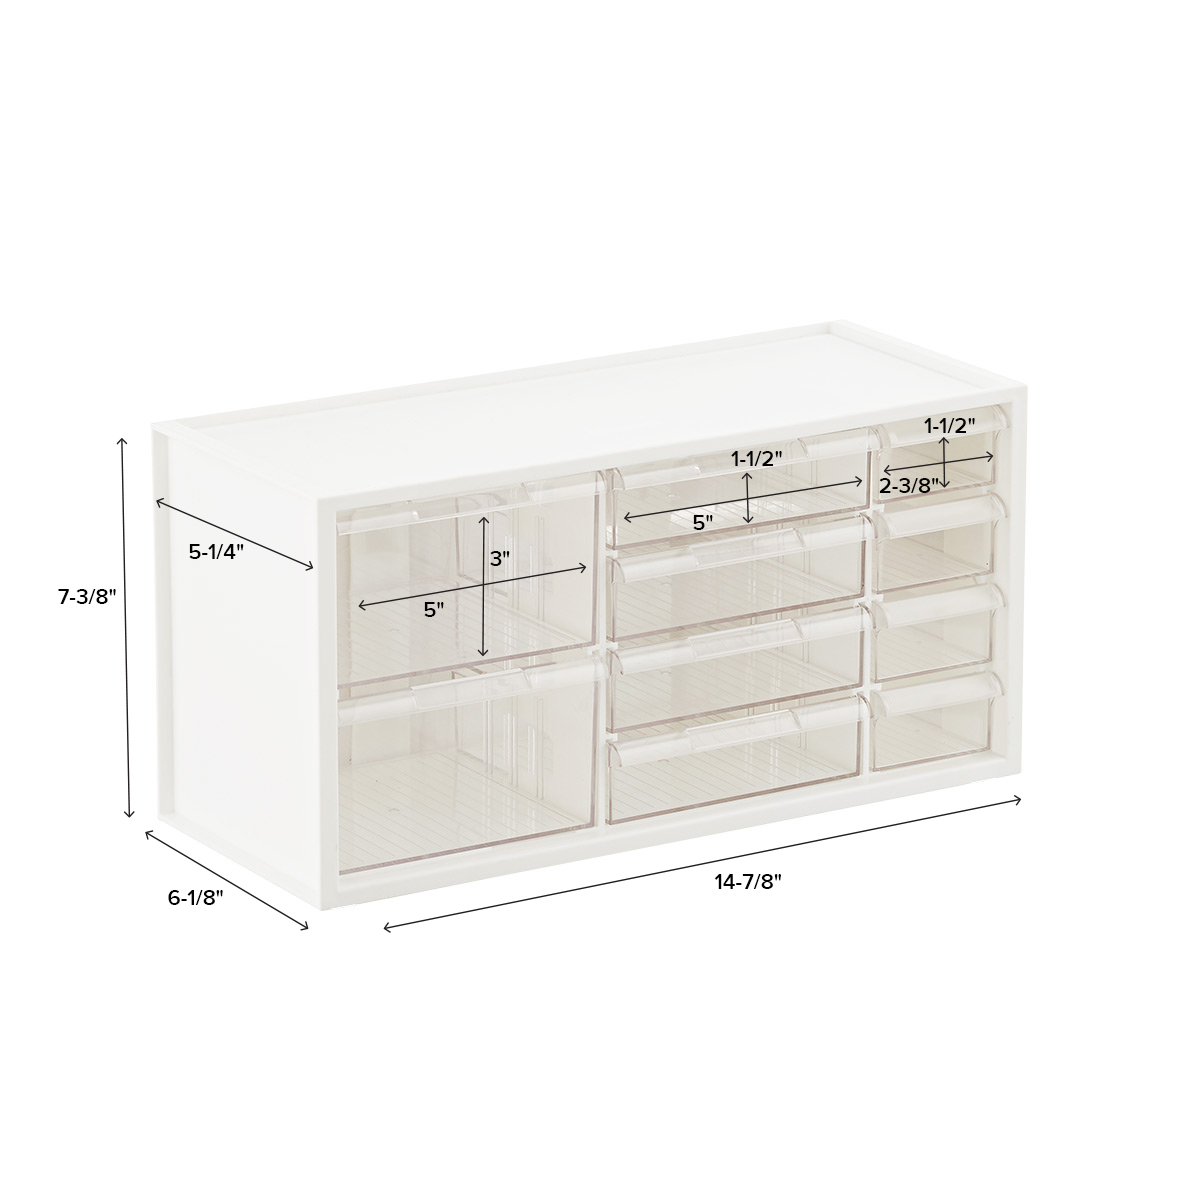 https://www.containerstore.com/catalogimages/447400/10074963-stackable-craft-organizer-1.jpg